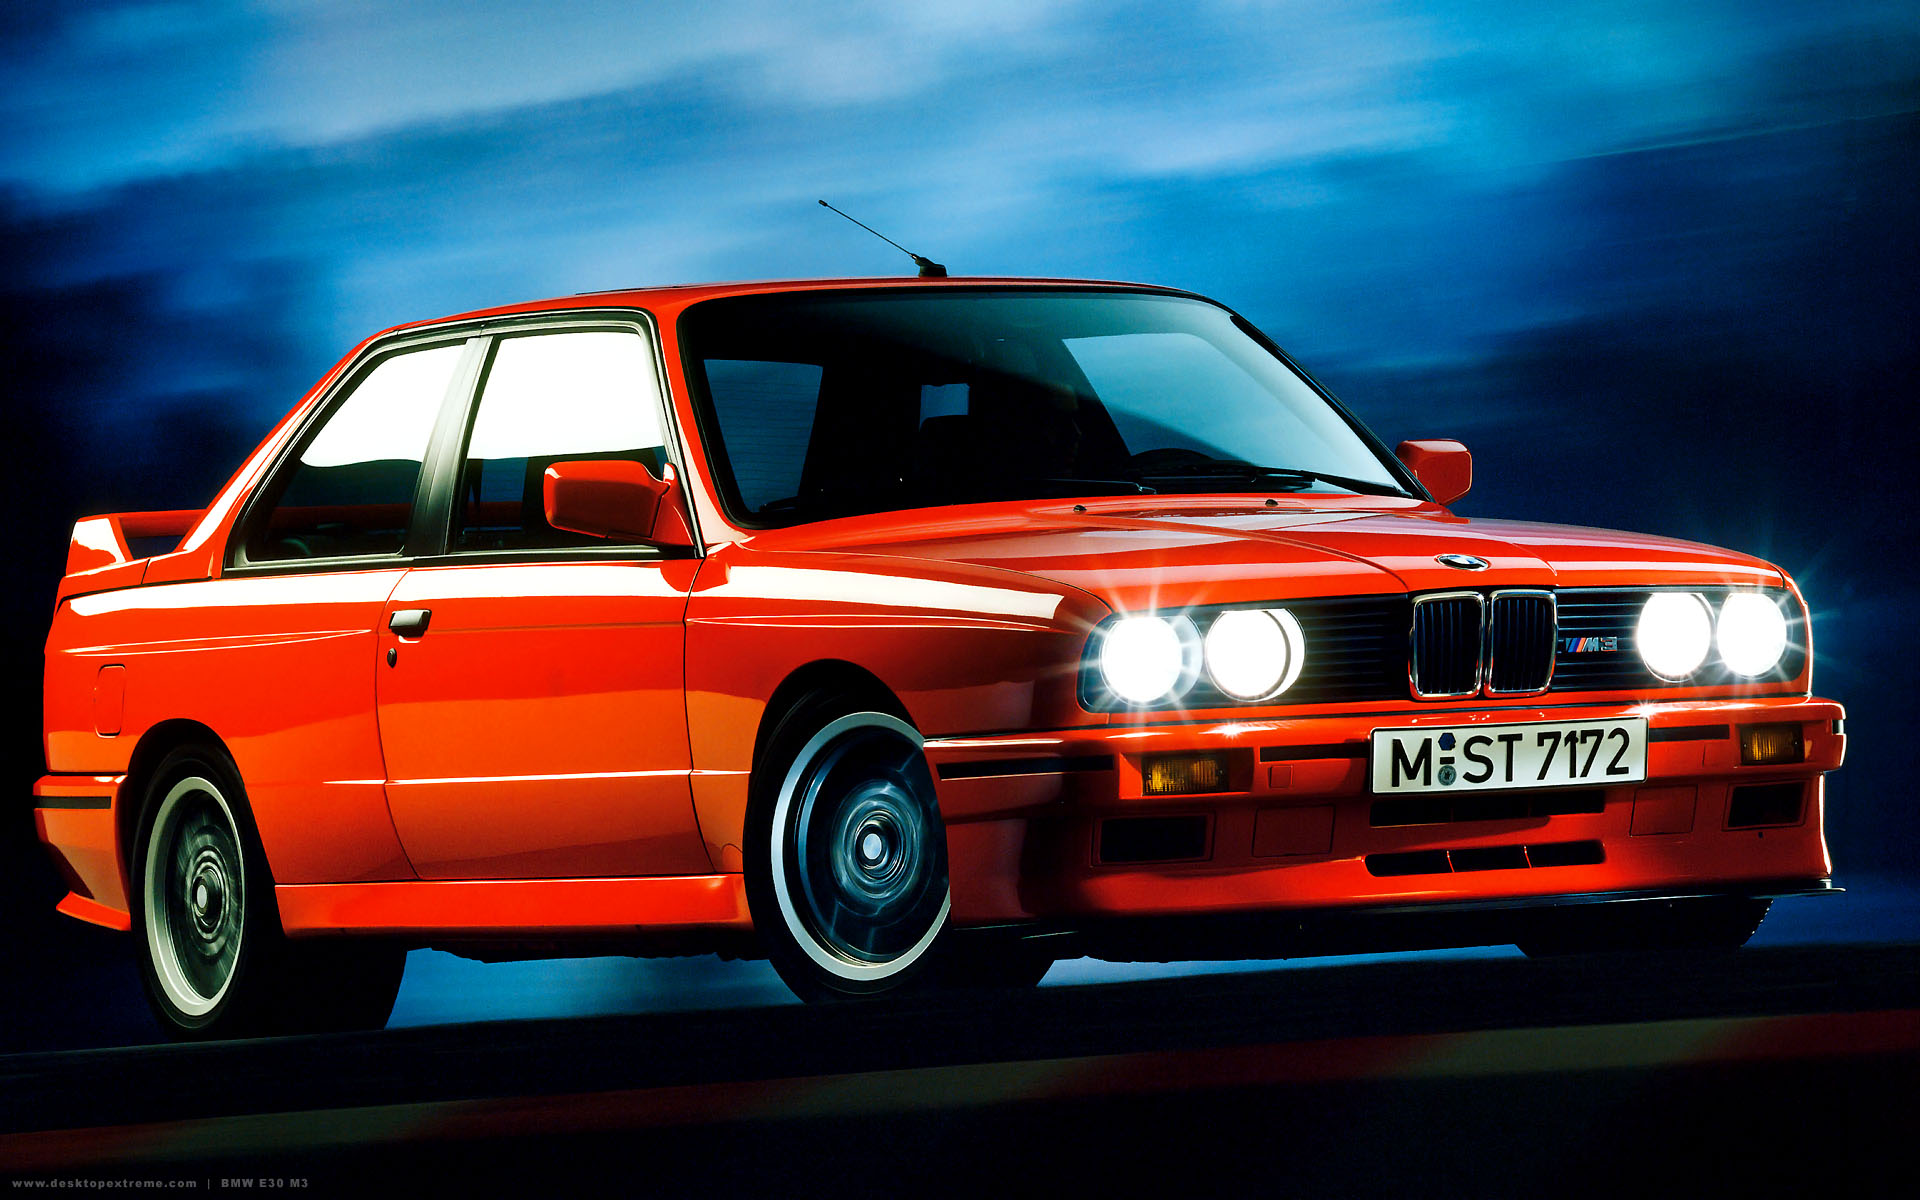 BMW M3 E30 Widescreen Wallpaper by DesktopExtremecom   Wallpaper For